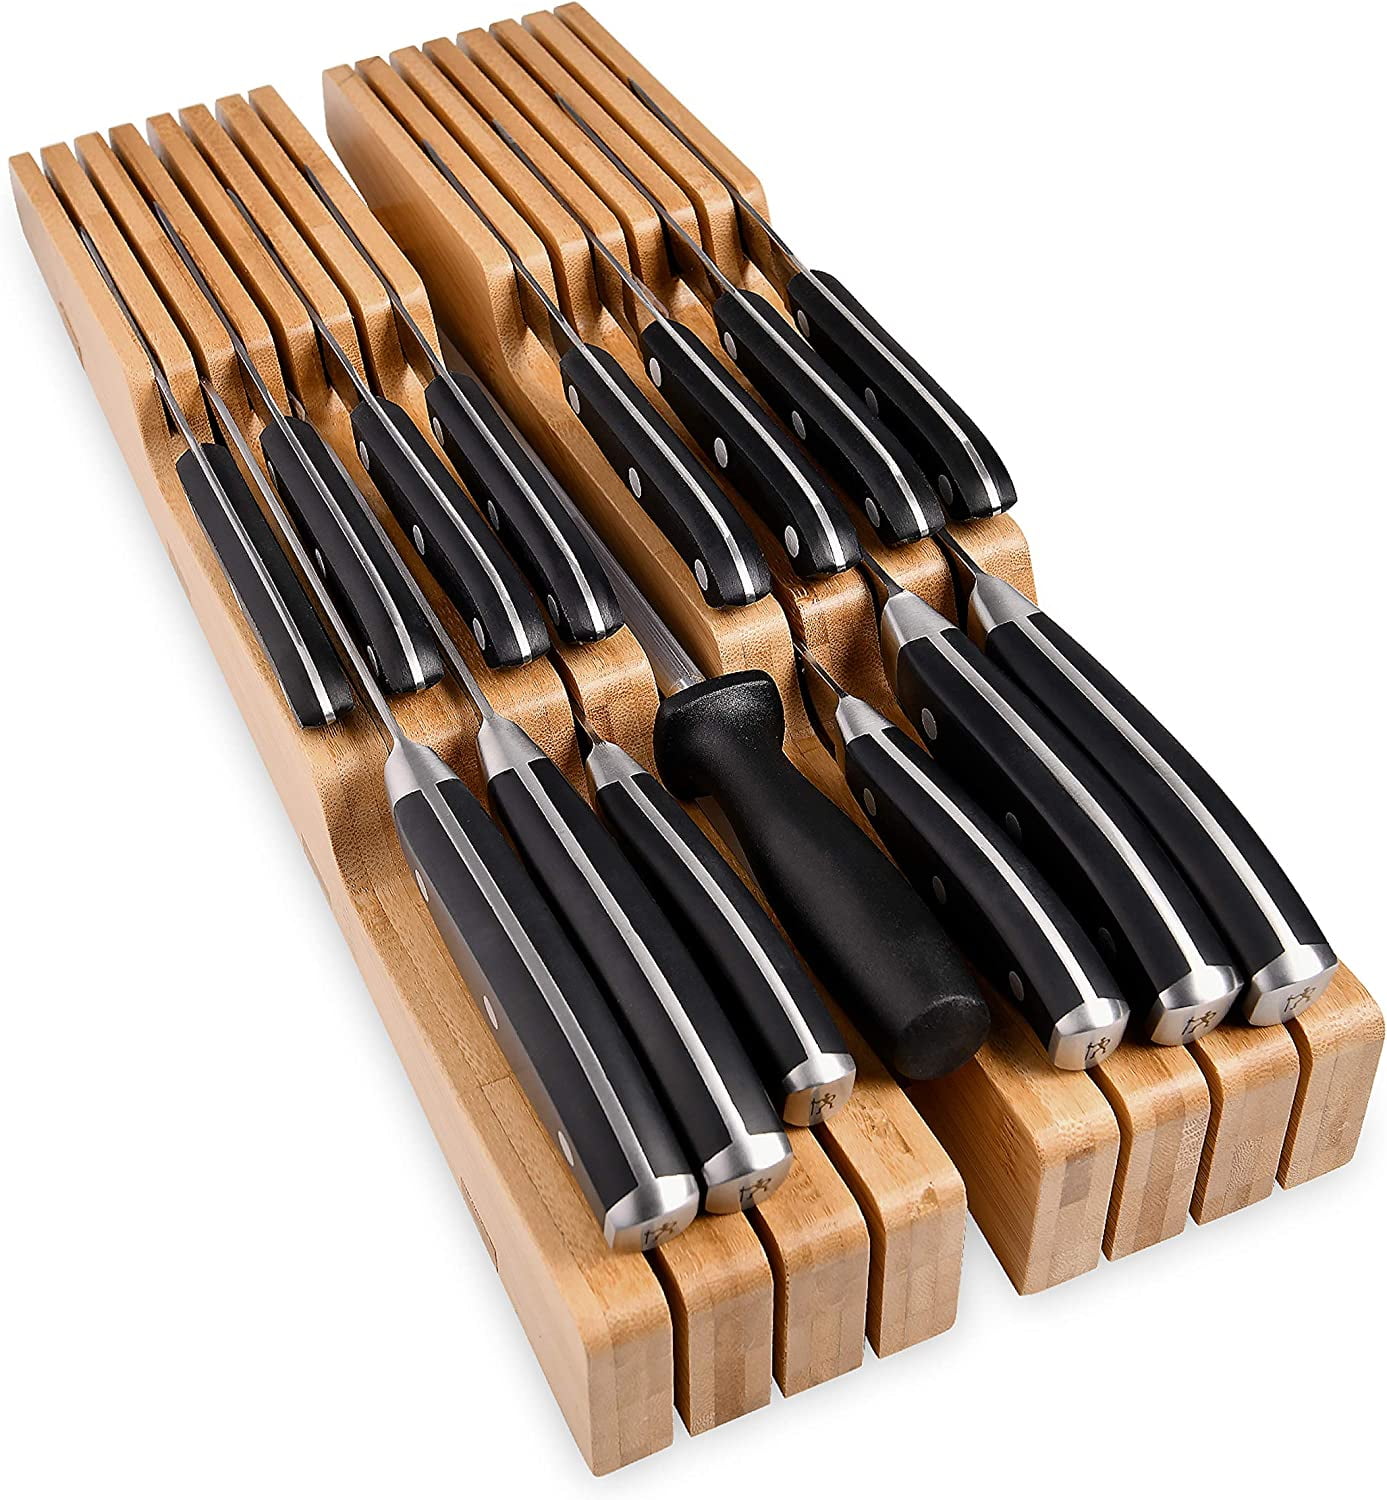 14-Pieces Damascus Kitchen Knife Set with Bamboo Drawer Organizer